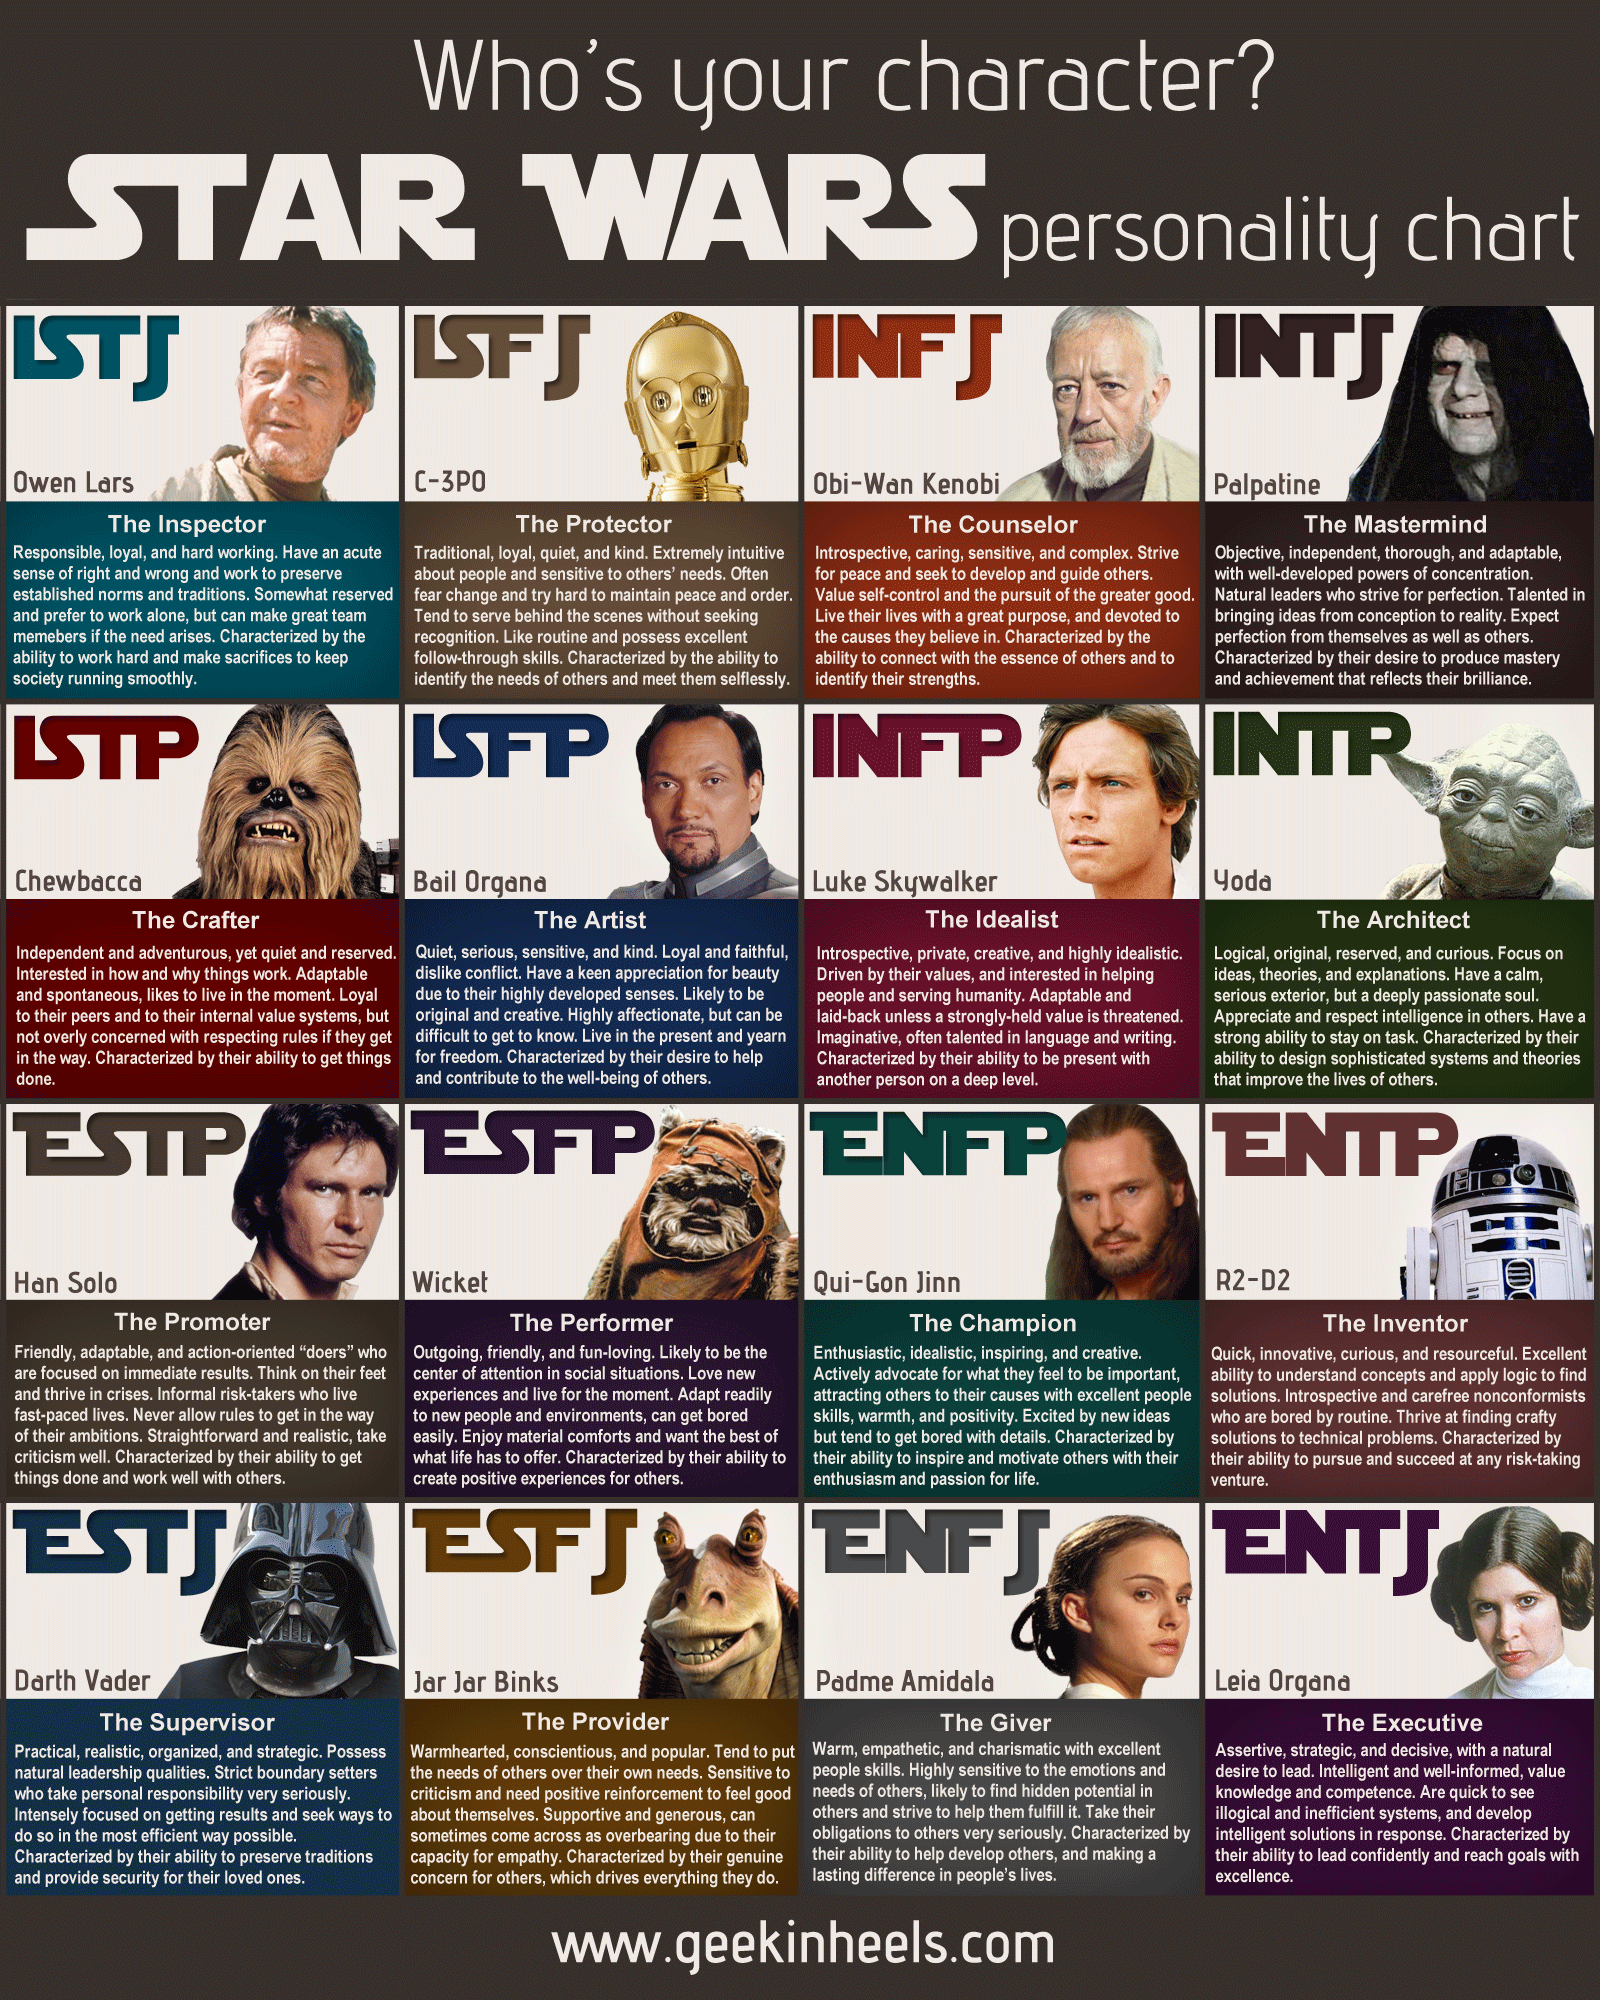 Guest MBTI Personality Type: INFP or INFJ?